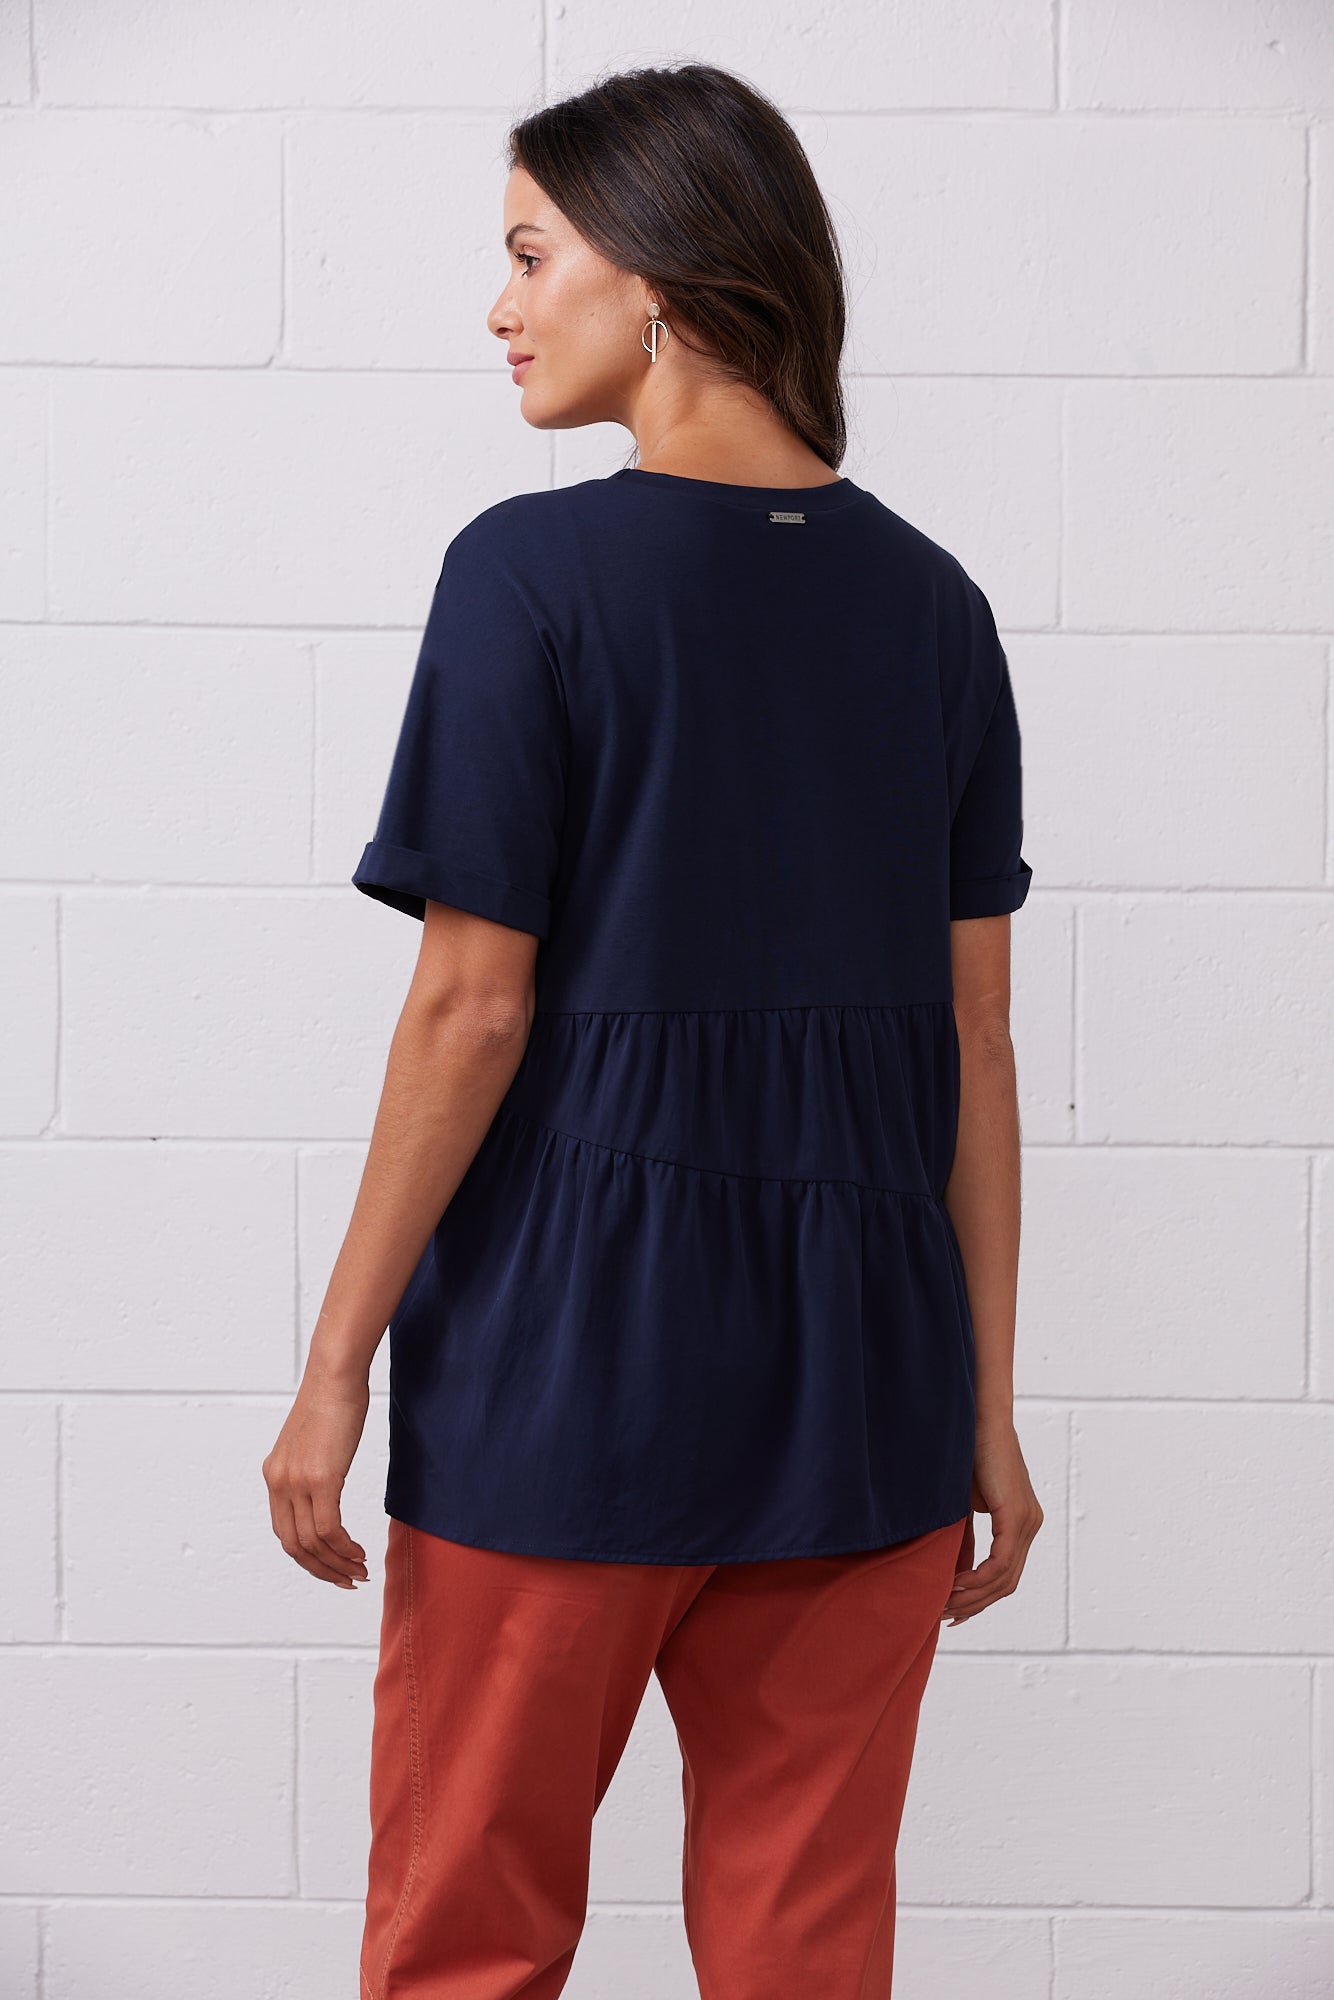 Newport -NP27704 Trixie Top - Navy and White - 70% Off